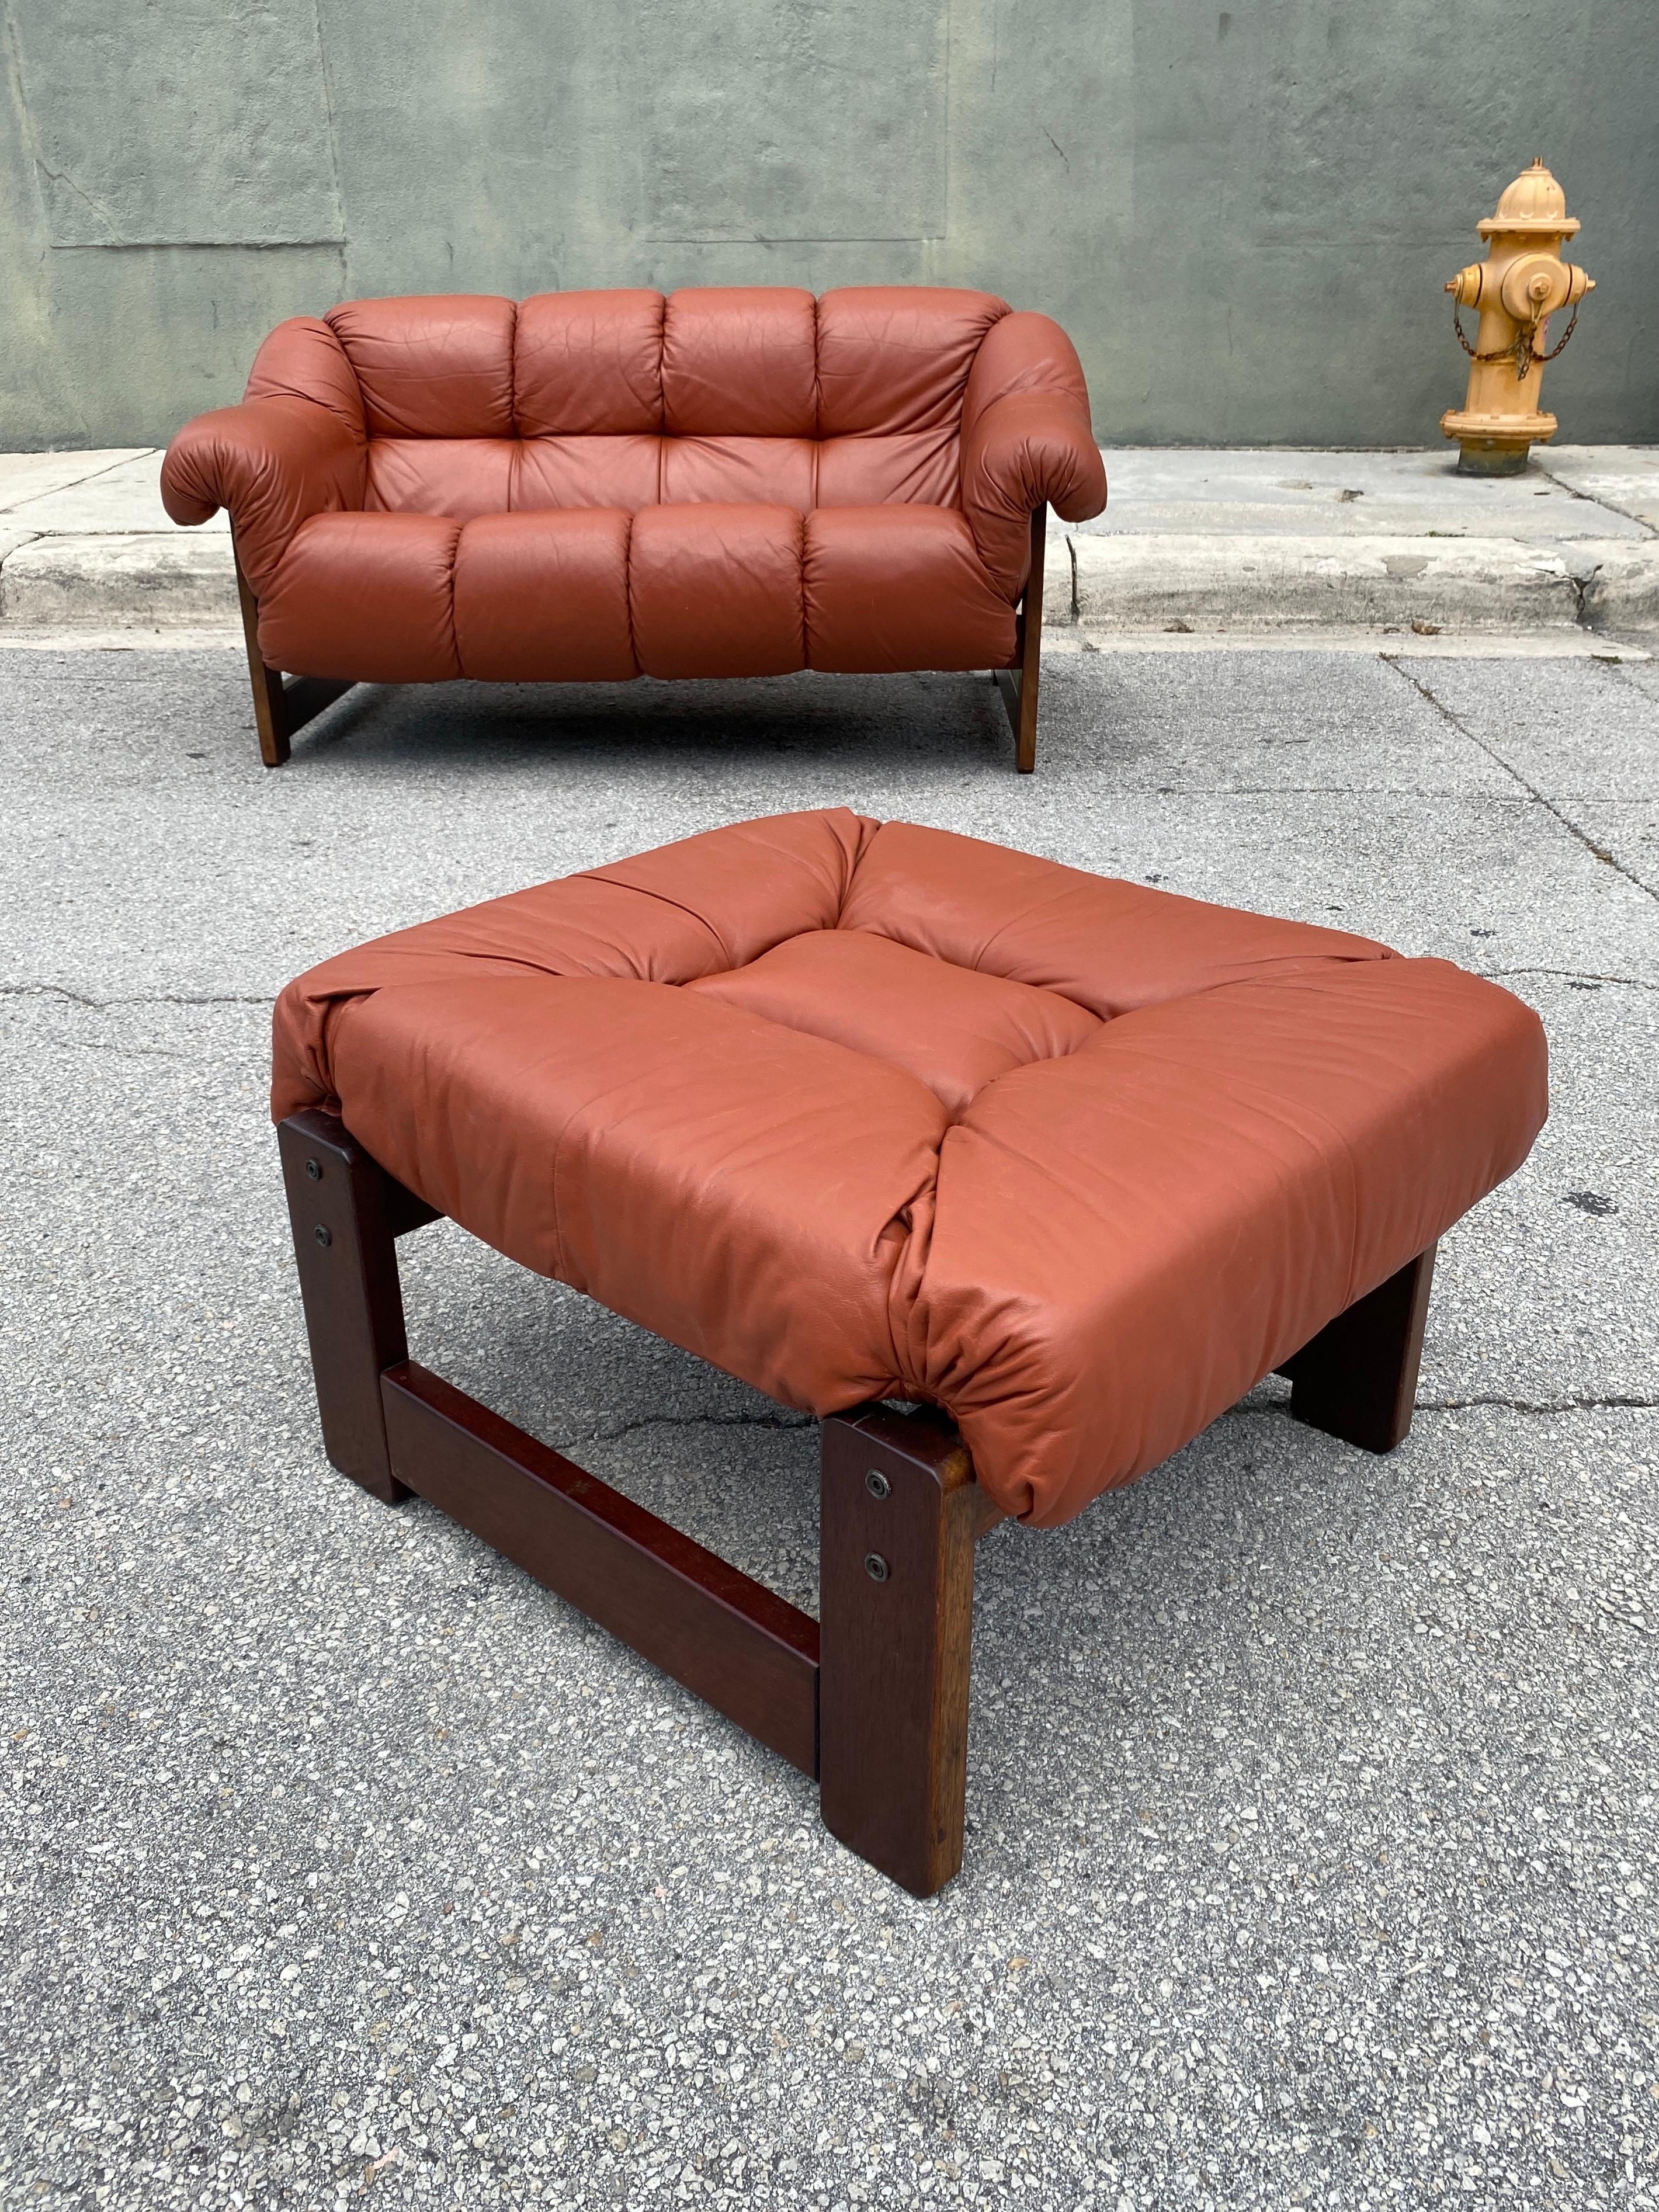 Vintage Brazilian leather and wood two seater marked by Moveis Corazza . Cognac leather, foam interior, Jatoba wood frame, leather straps. Sturdy construction in great vintage condition. Circa 1960s.

Measures: 27”H x 62”W x 37”D x 14”Seat H less.